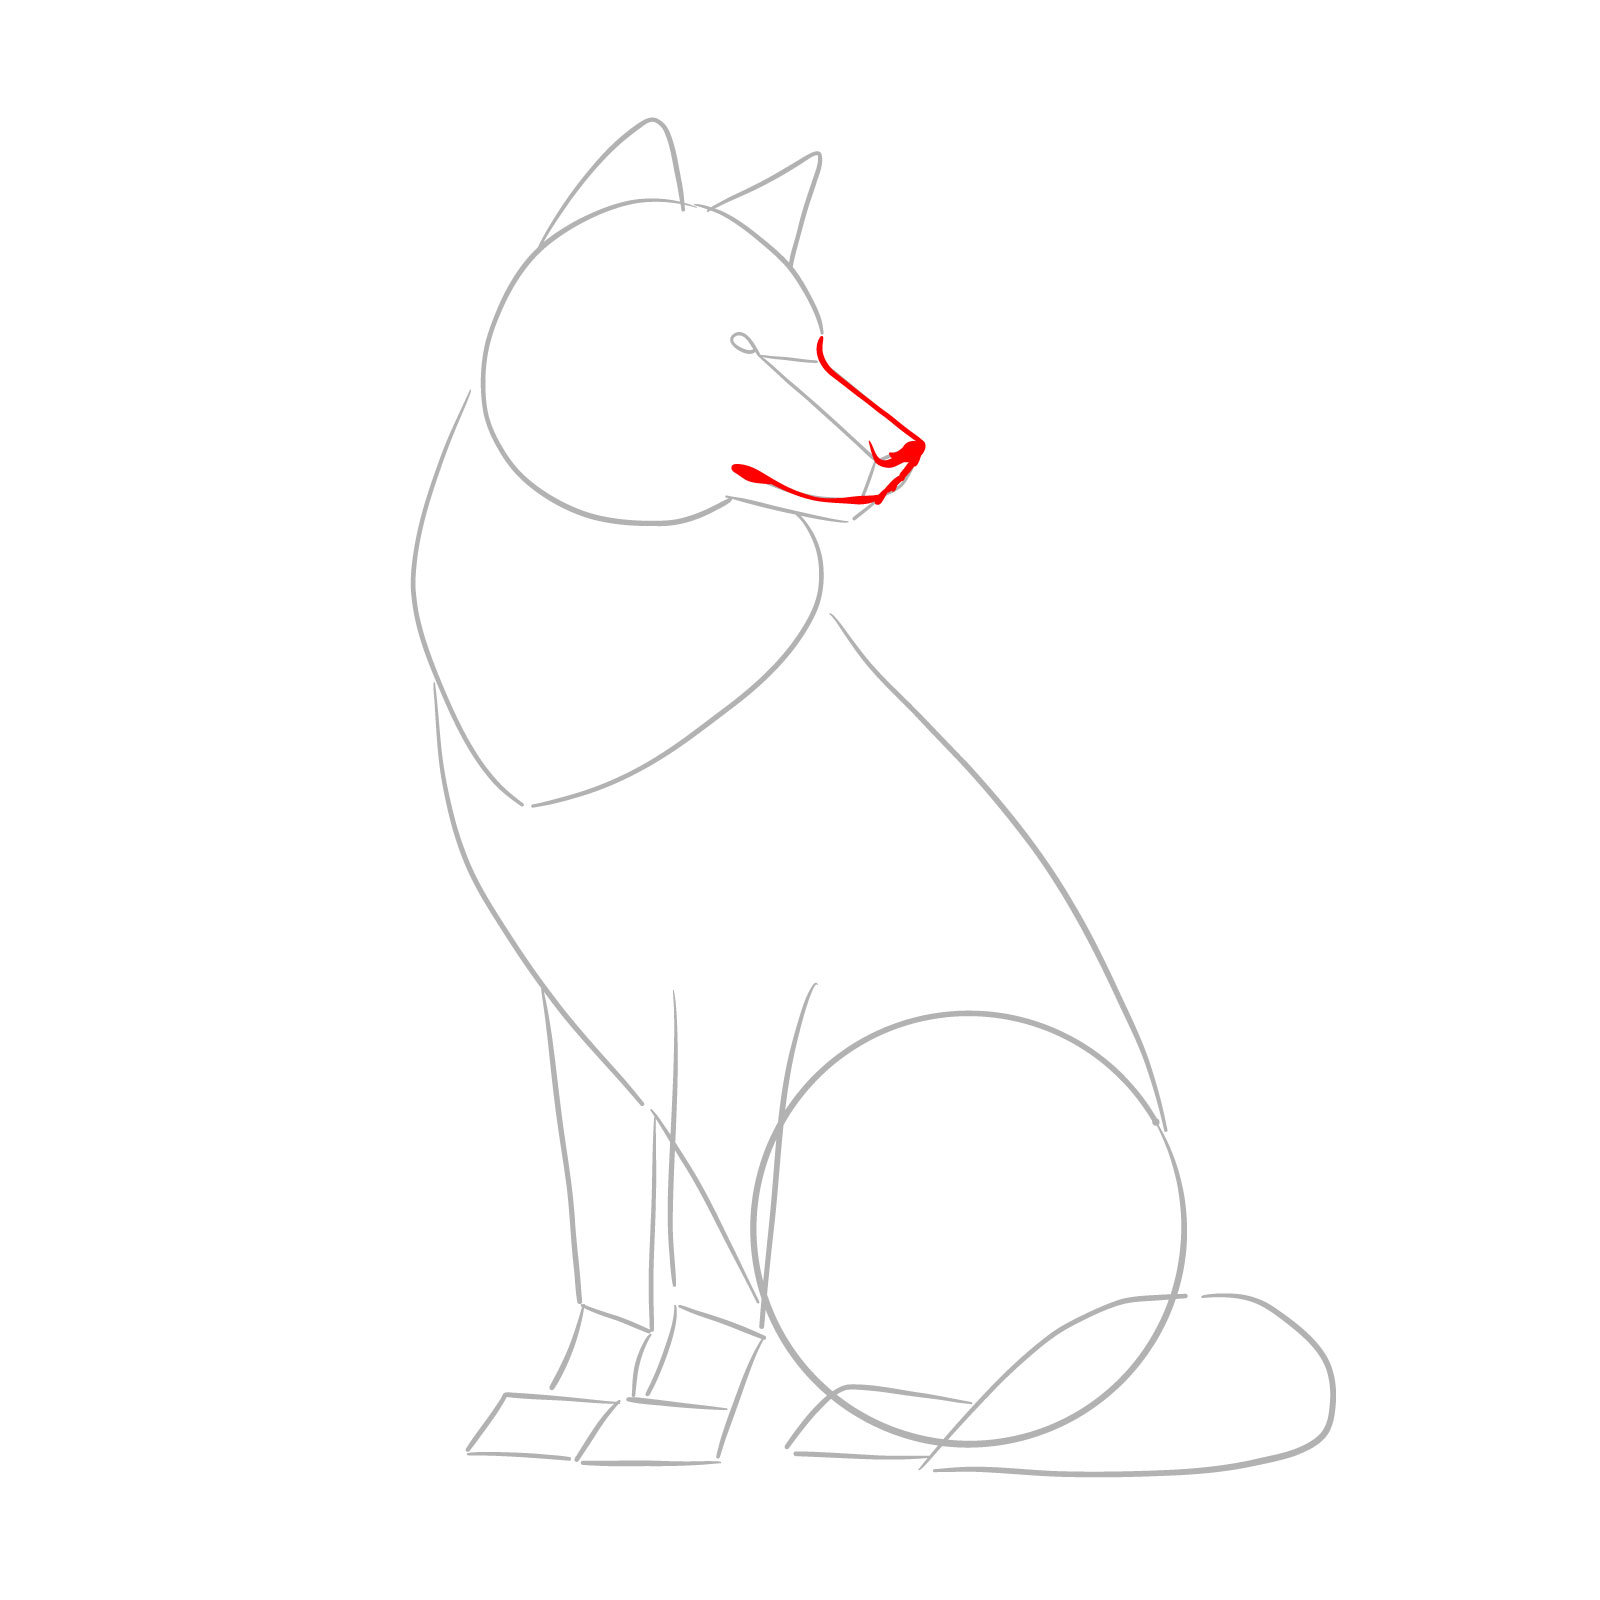 Outlining the upper snout and facial features of a sitting wolf - step 04